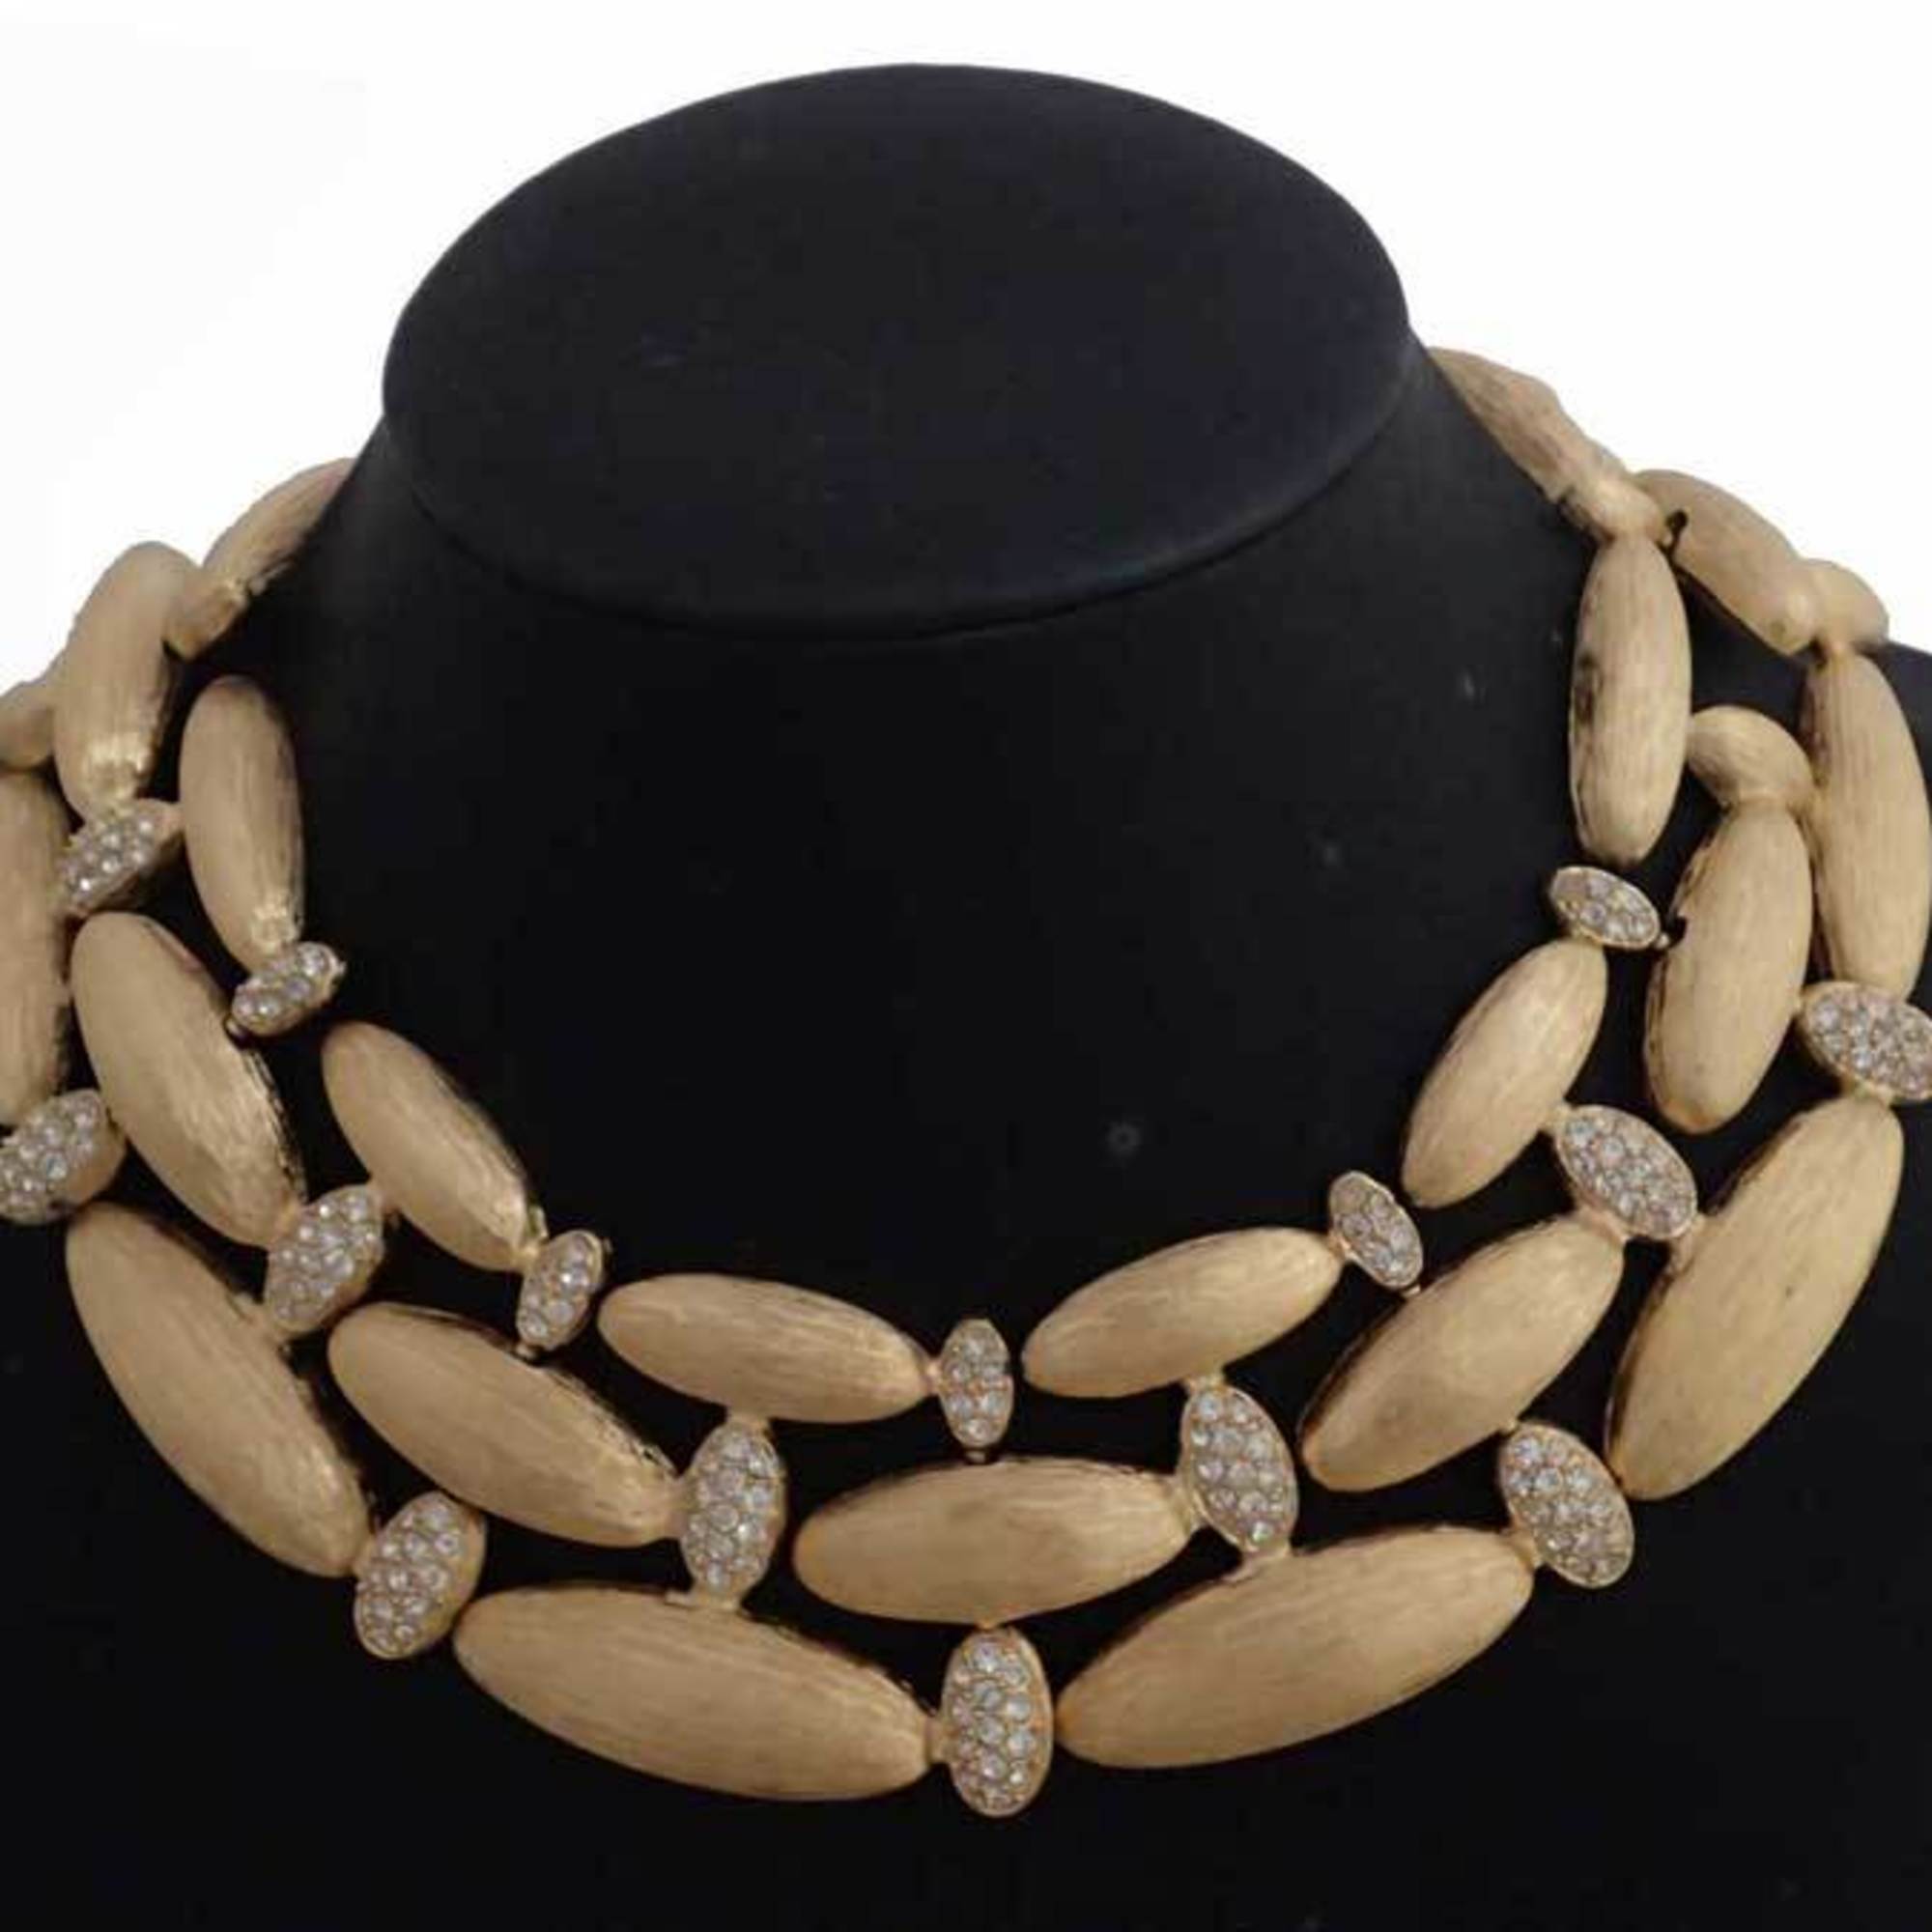 Givenchy GIVENCHY Choker Necklace Gold x Silver Metal Material Rhinestone Women's